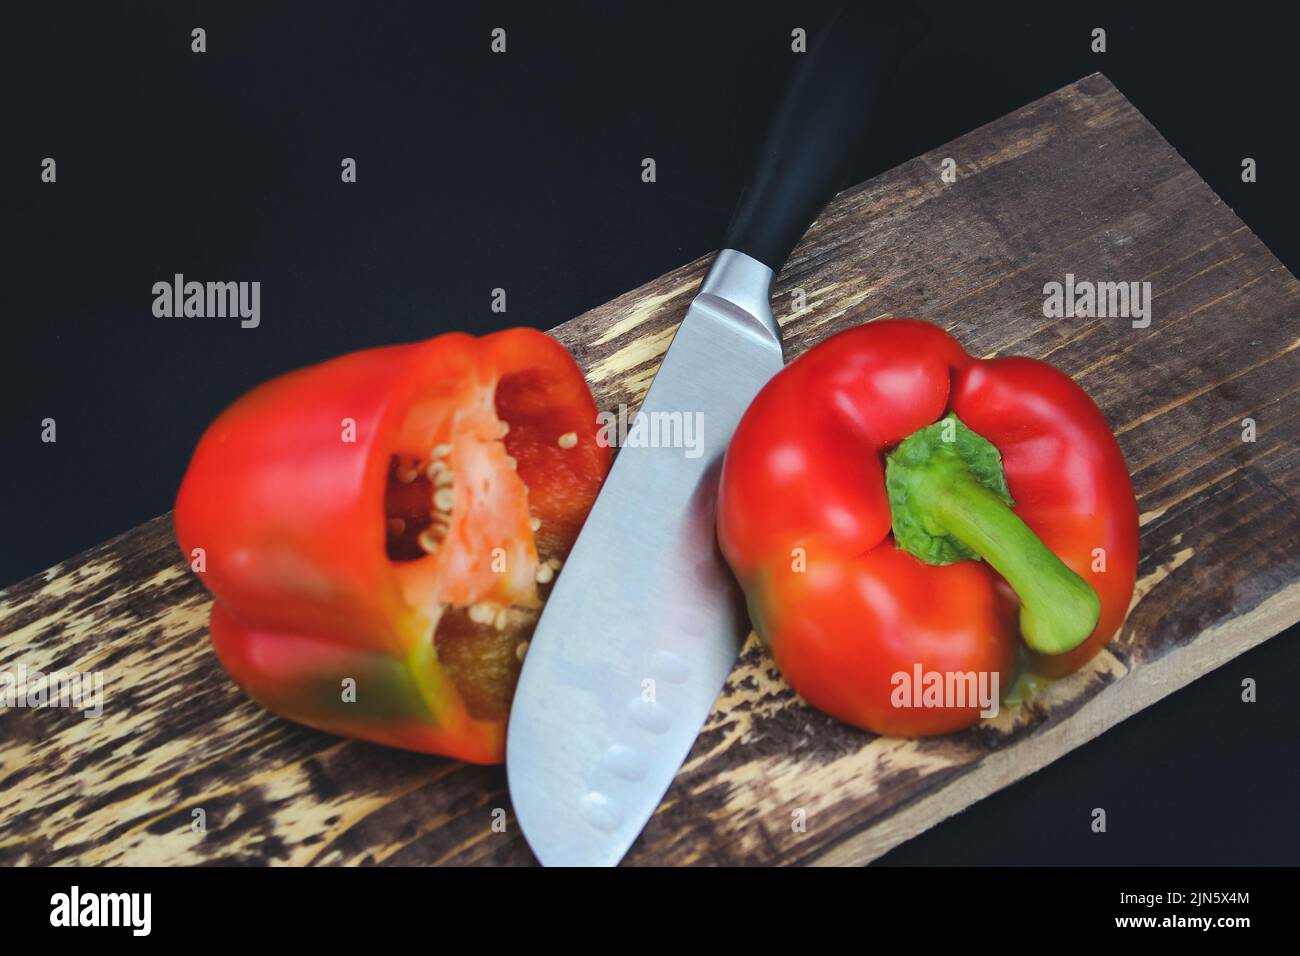 Knife cutting red pepper on wooden board. Stock Photo